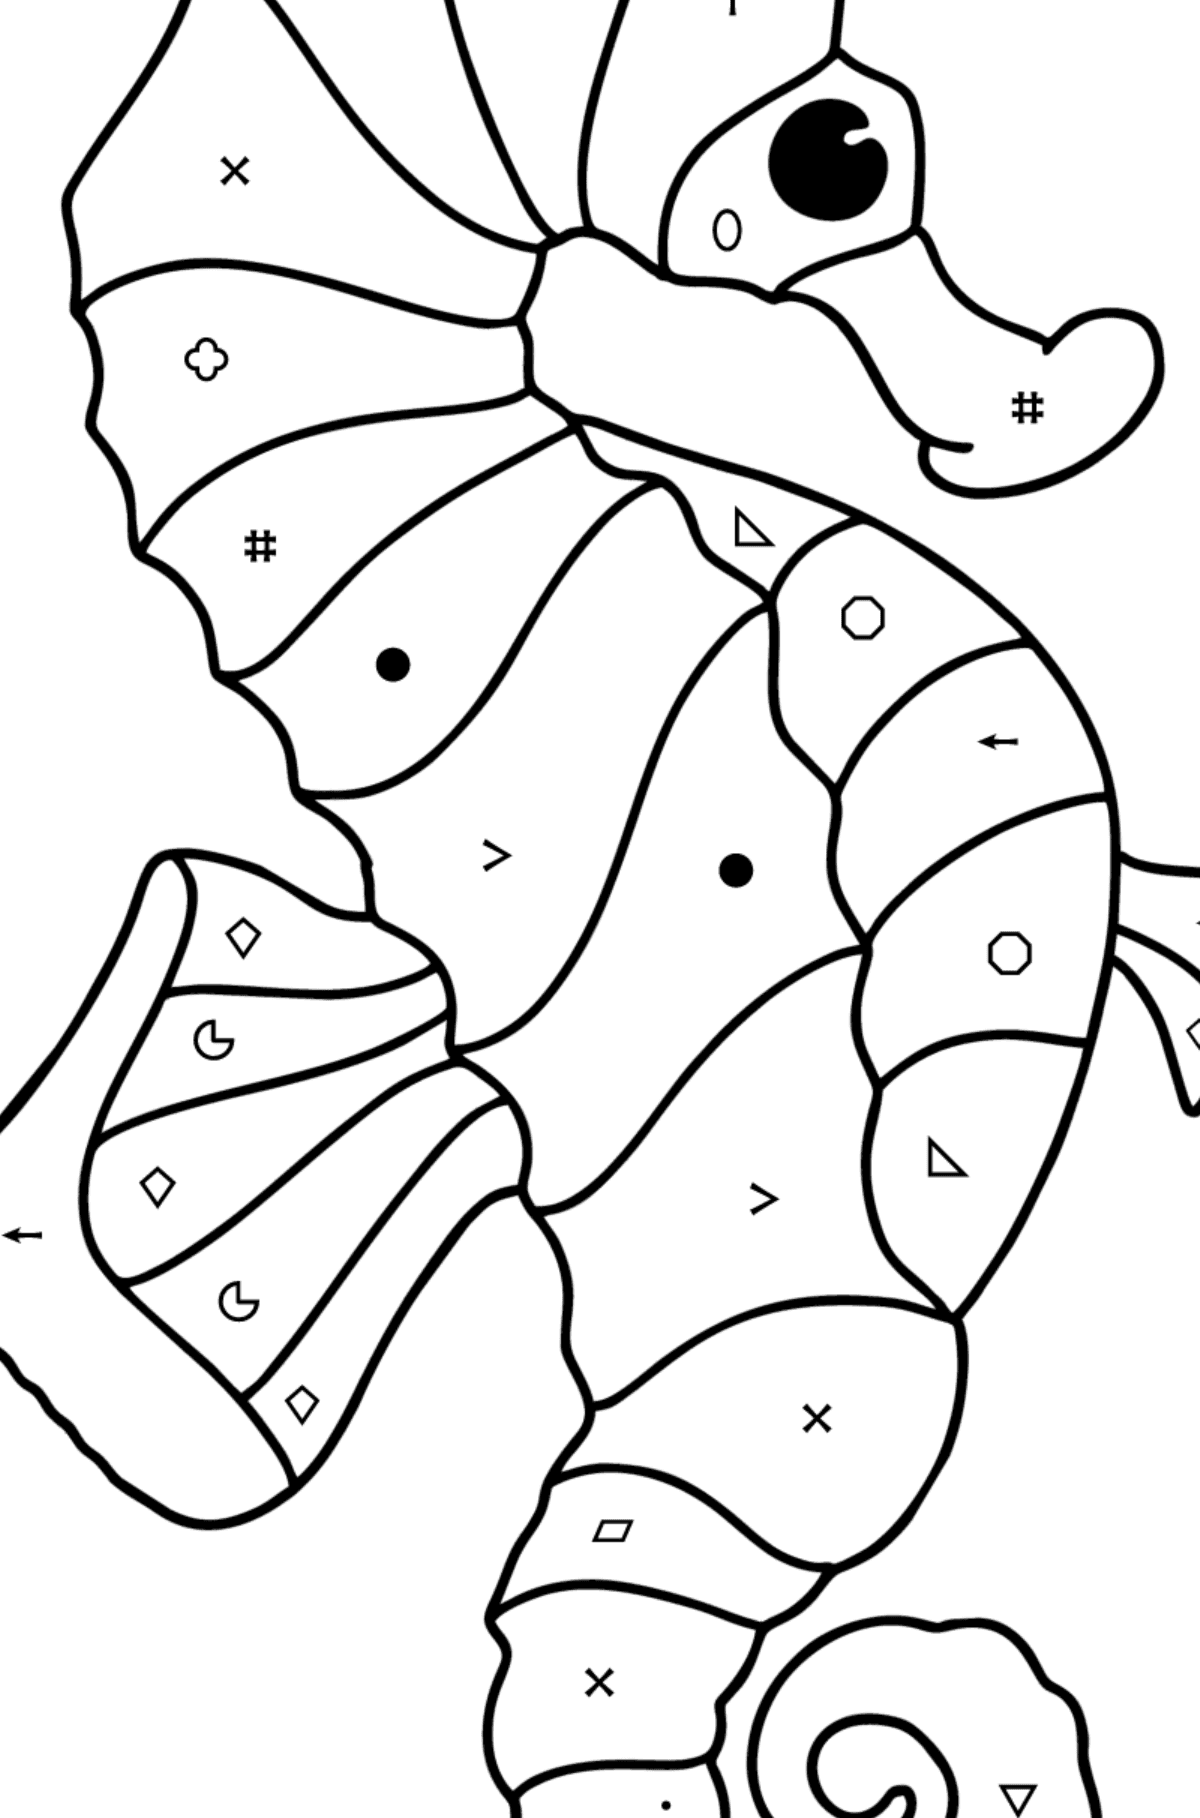 Sea Horse coloring page - Coloring by Symbols and Geometric Shapes for Kids